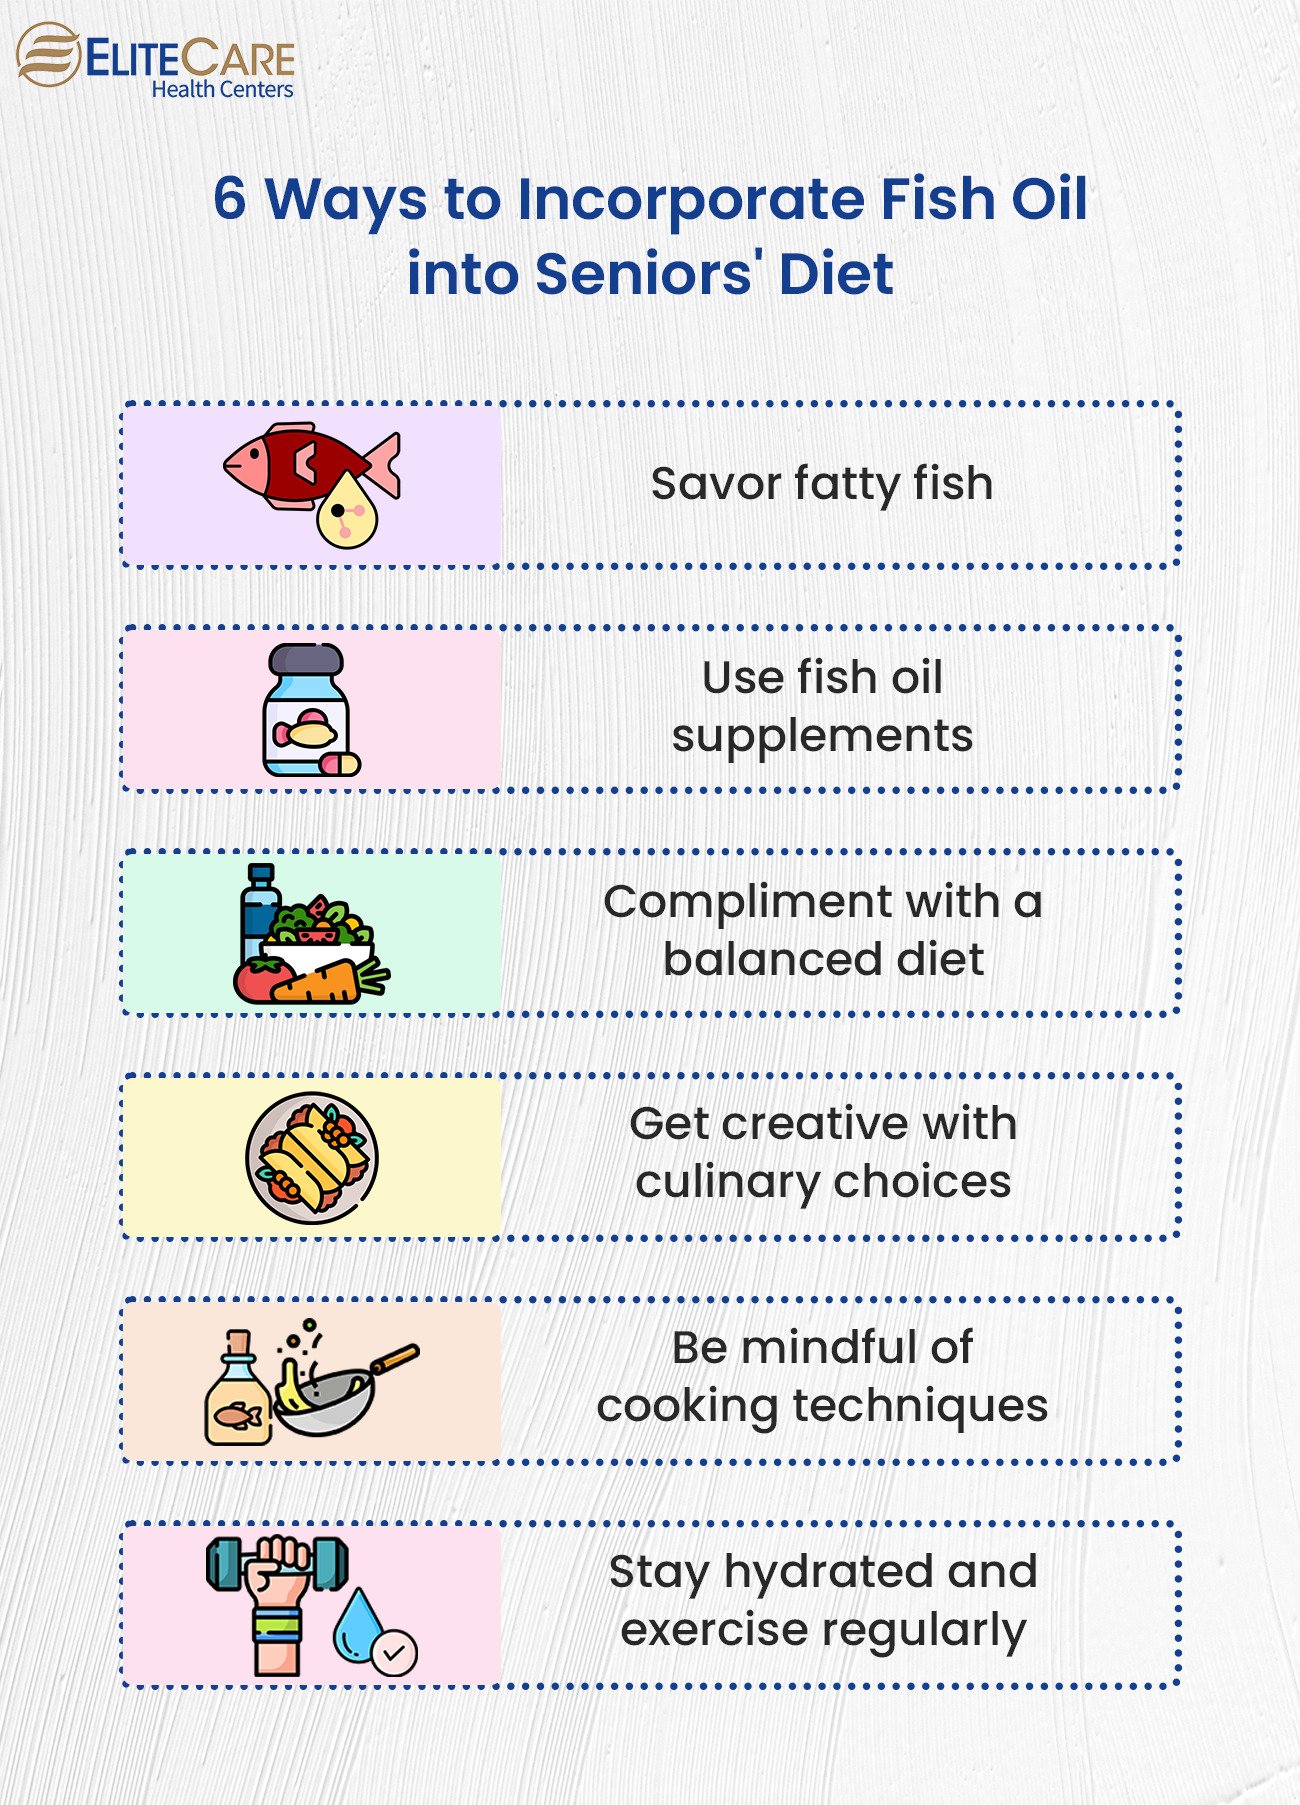 6 Ways to Incorporate Fish Oil into Seniors Diet